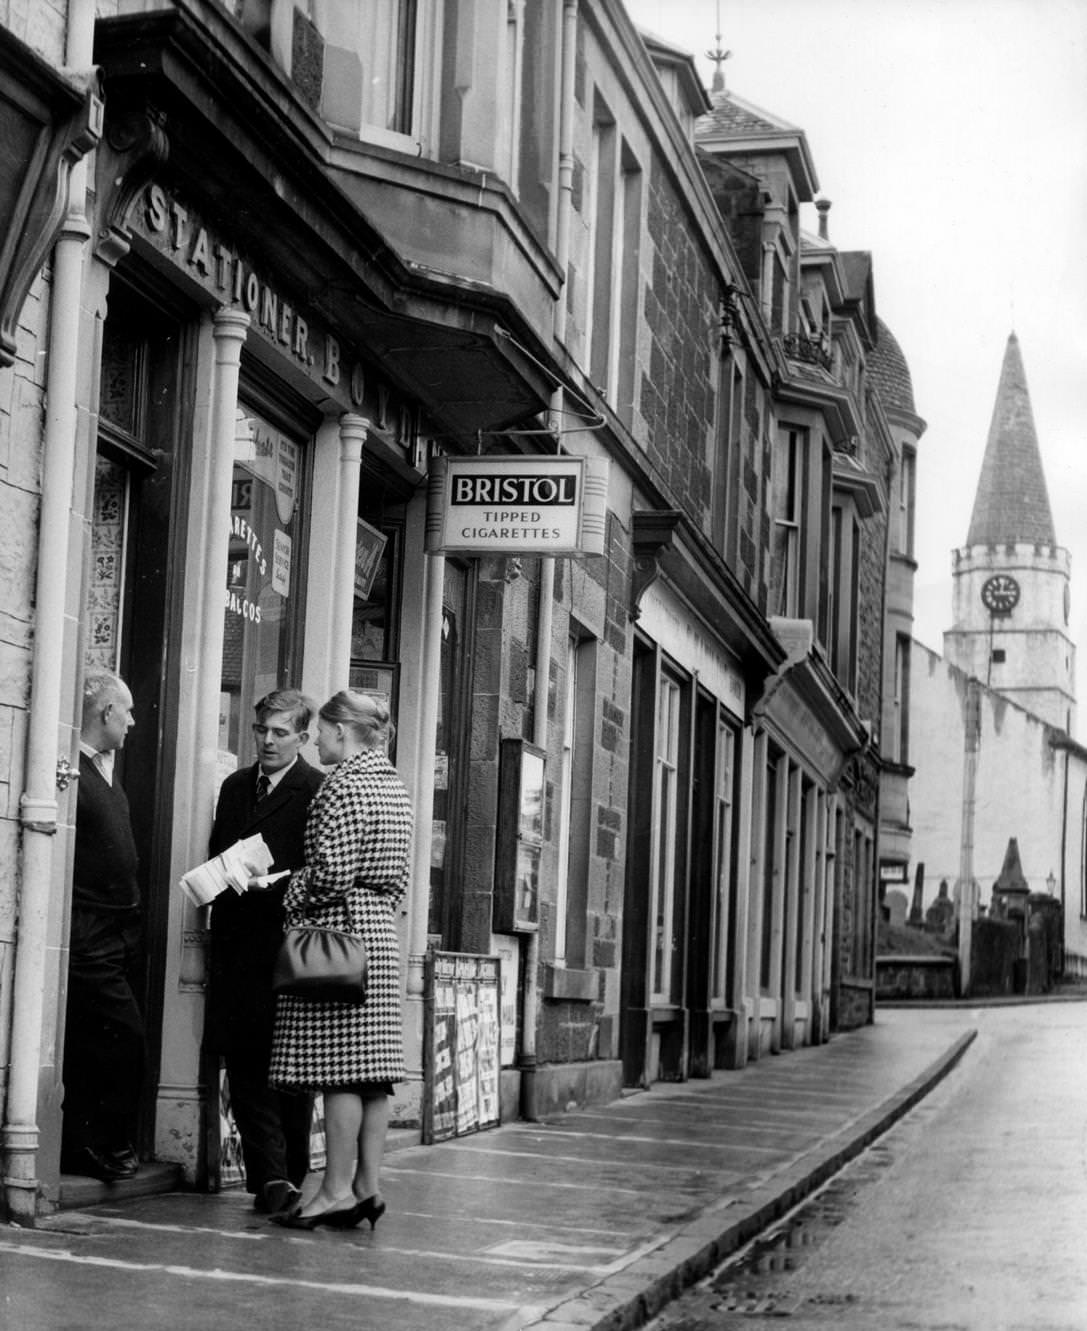 Candidate Andrew Forrester and his wife chat with a shopkeeper in Comrie, Scotland, 1963